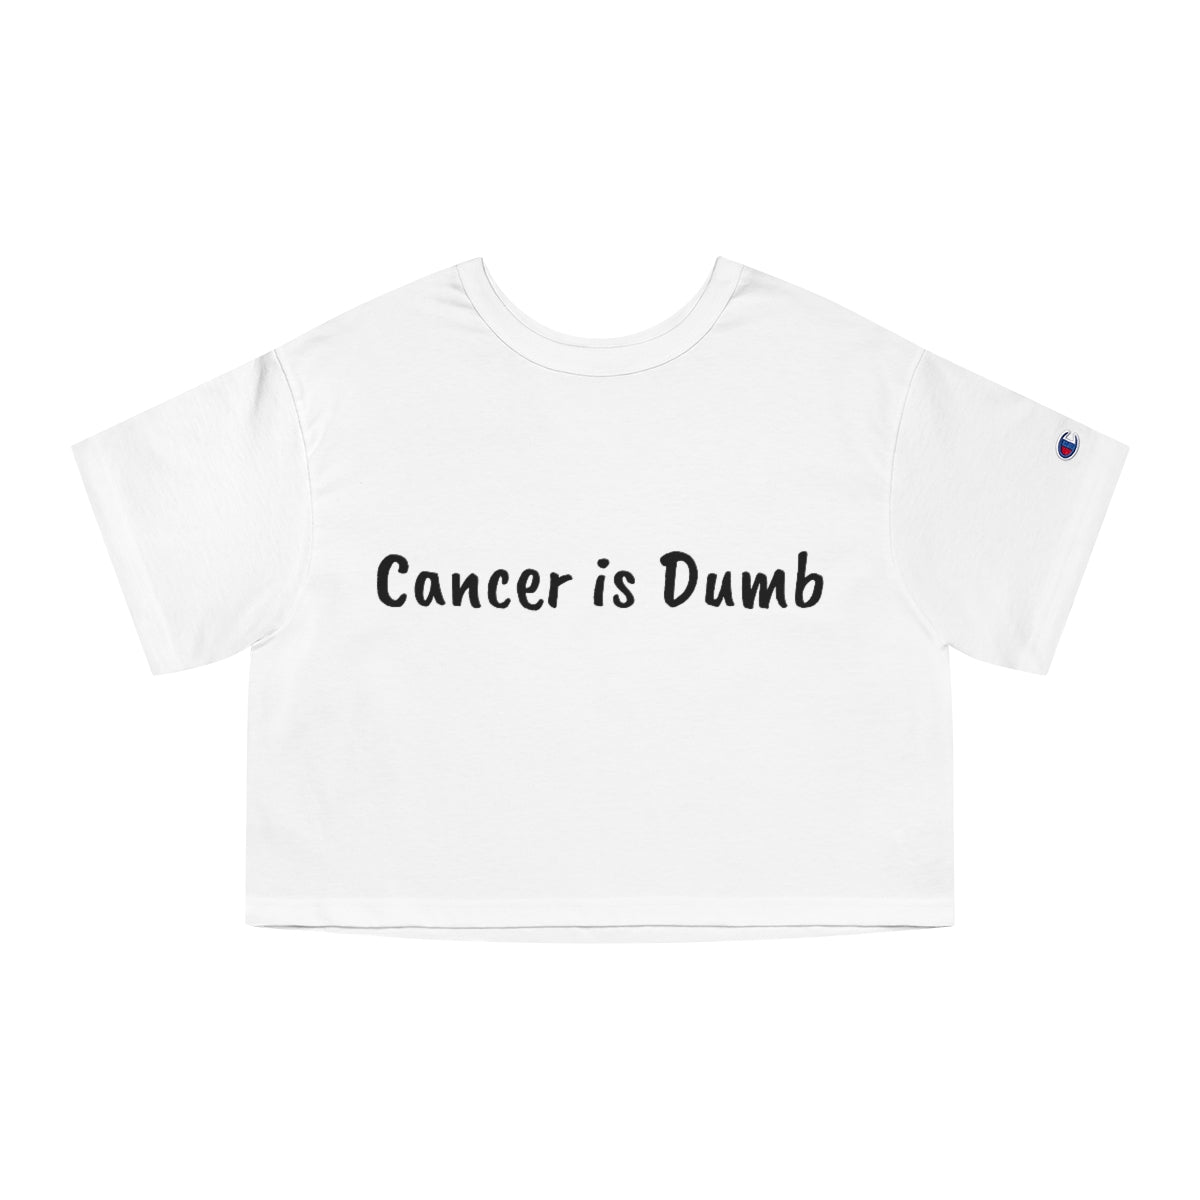 Champion Women's Heritage Cropped T-Shirt Anti Cancer Cancer is Dumb Shirt Tshirt Womens Apparel Survivor